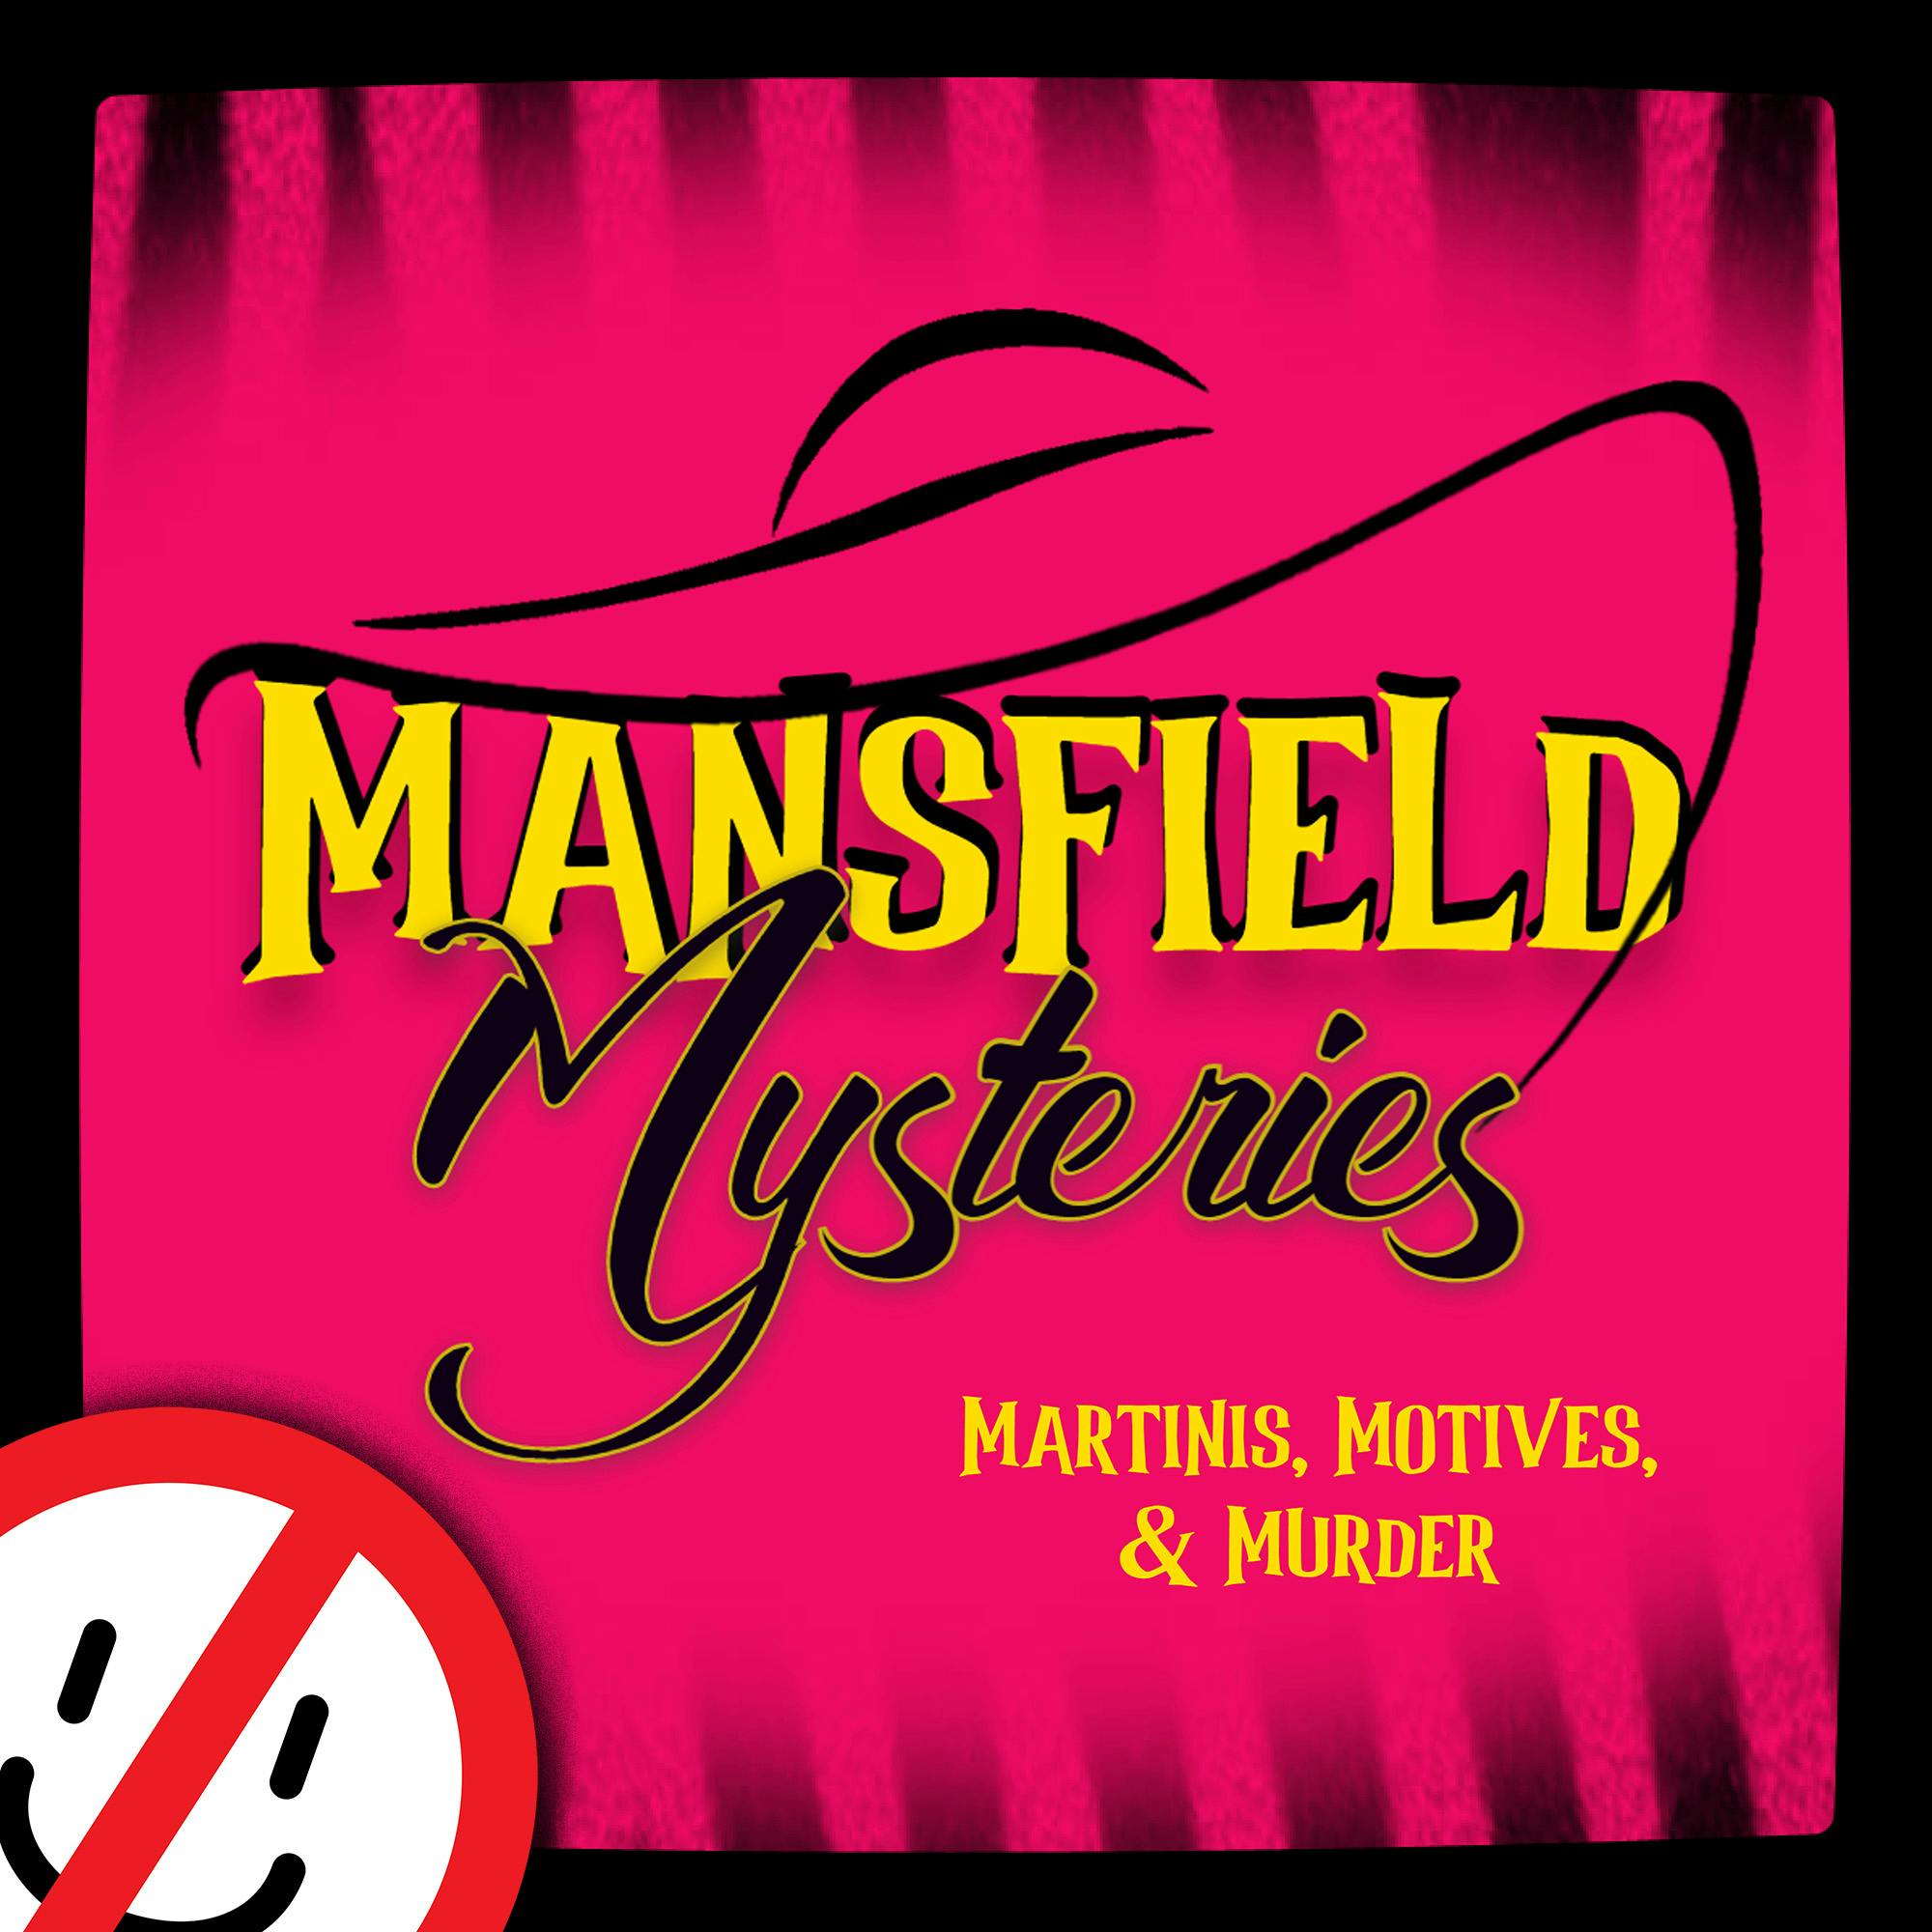 FEATURING: Mansfield Mysteries